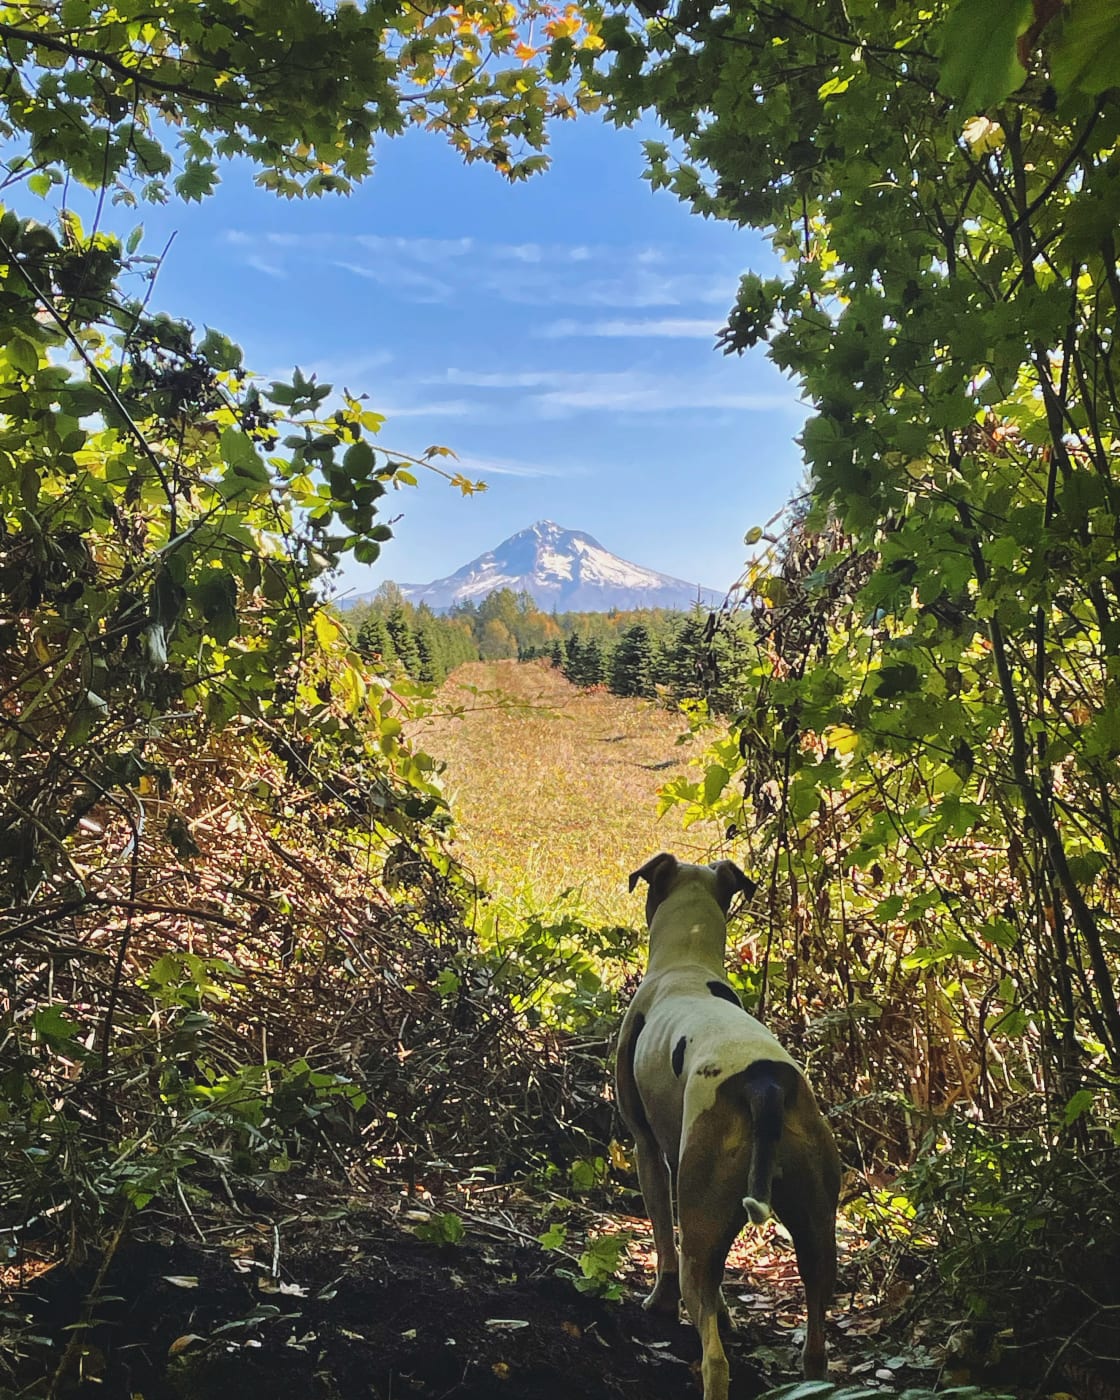 Hike up the almost 2 miles of trails to find your own private viewpoint of Mt Hood. Dogs are more than welcome too!